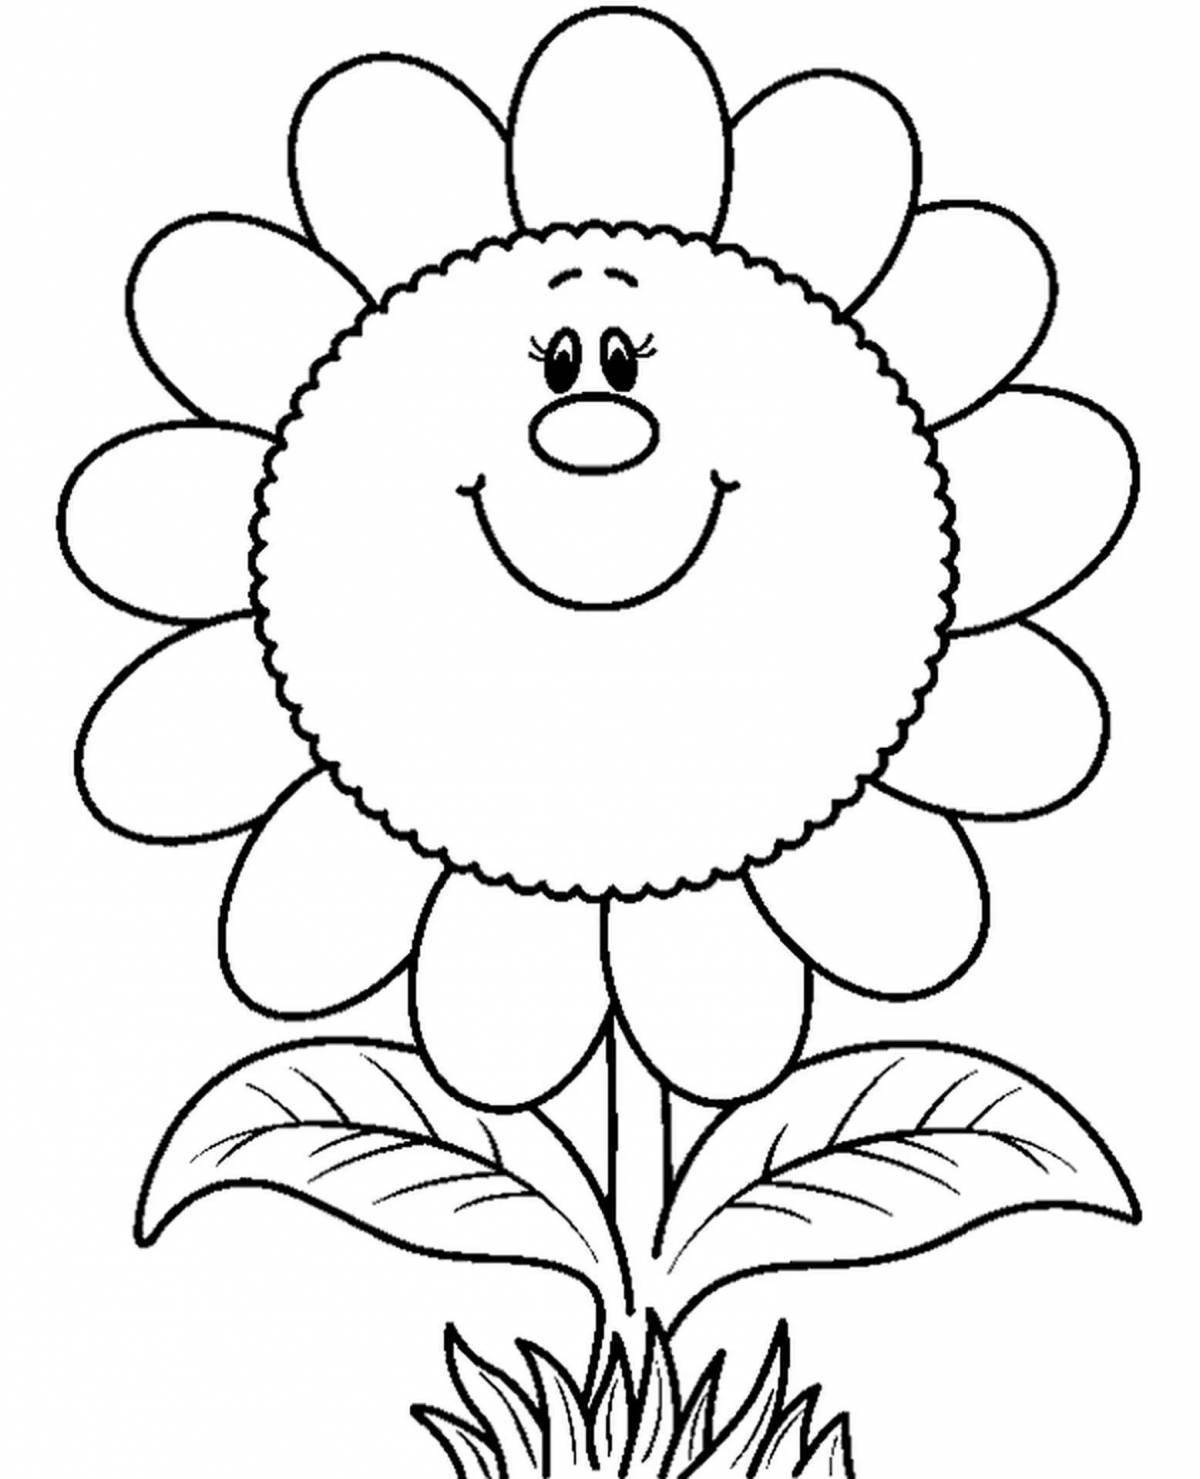 Fabulous flower coloring book for 4-5 year olds